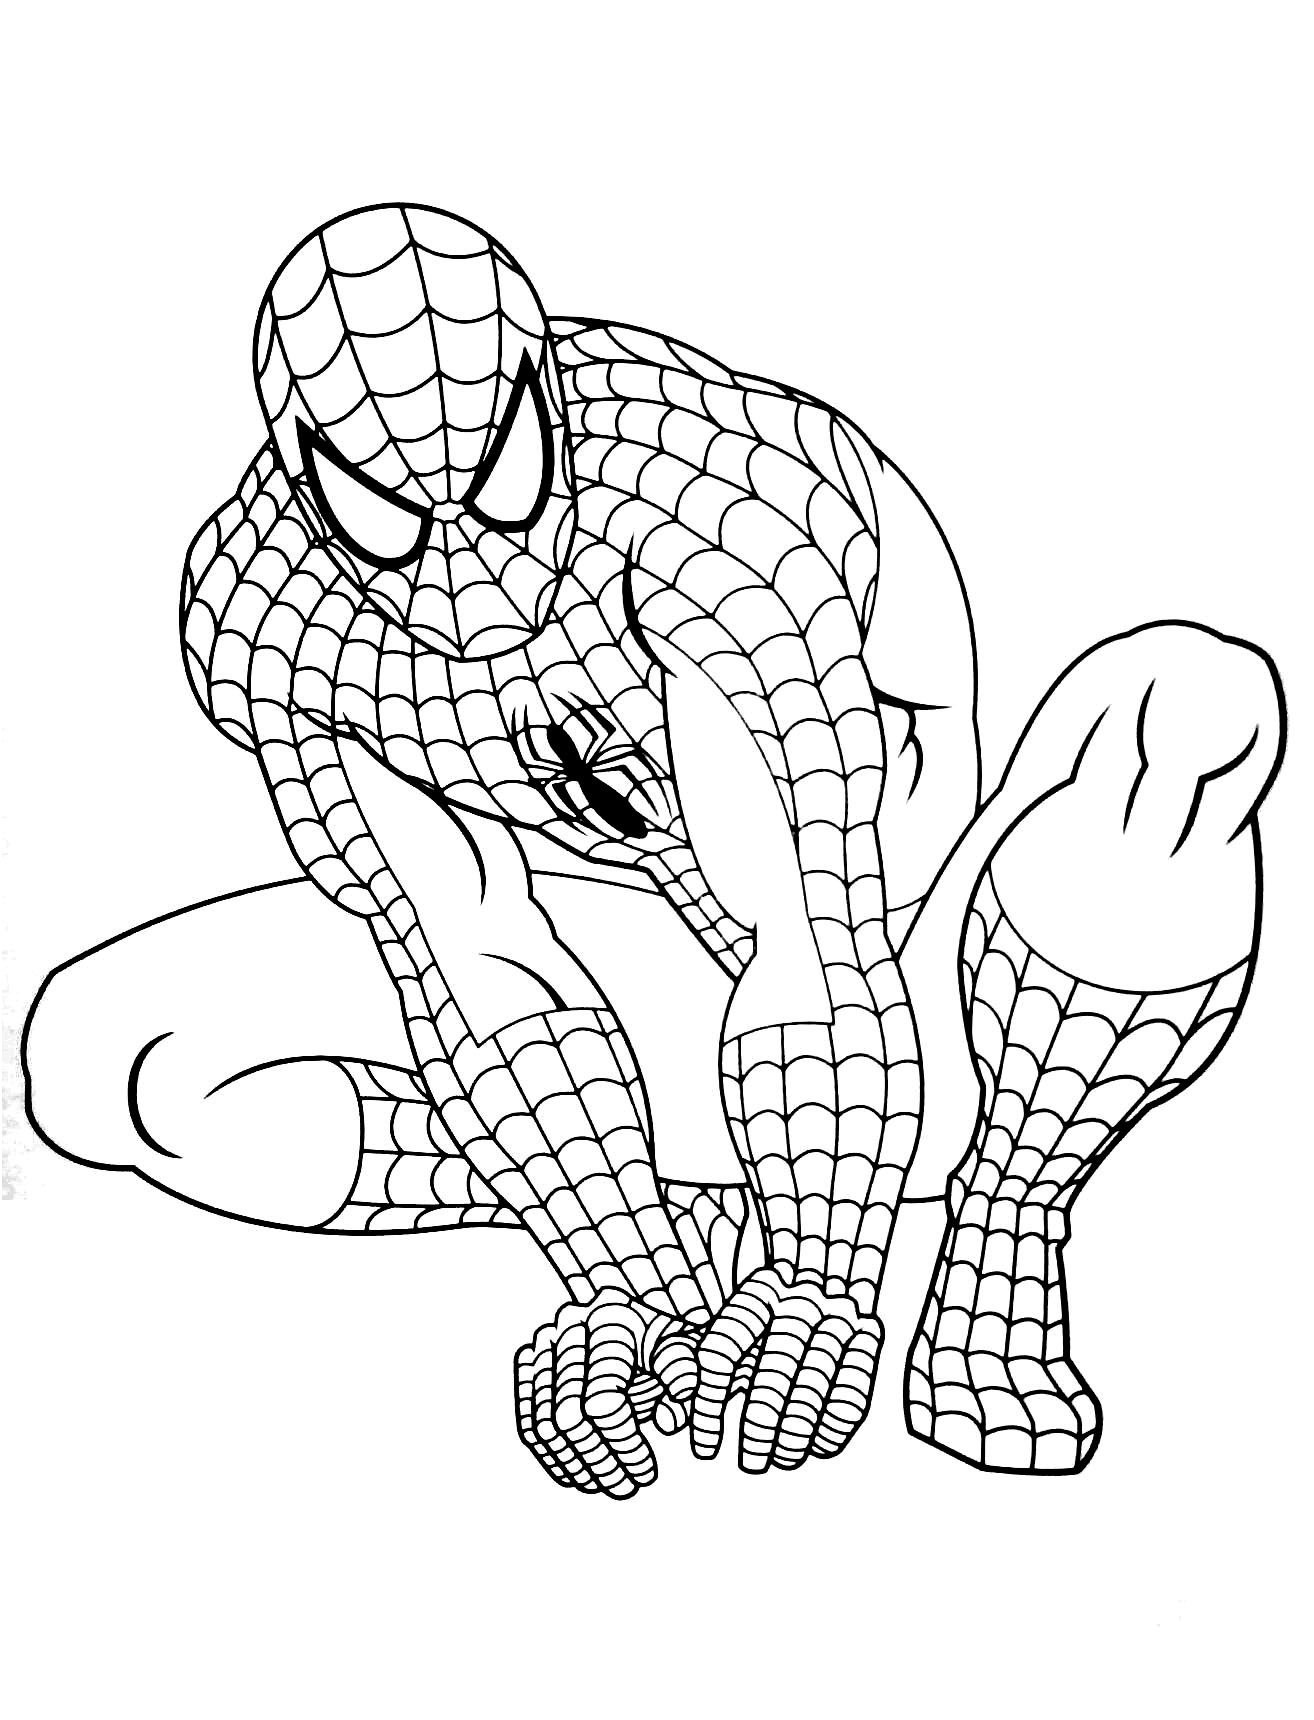 image=spiderman Coloring for kids spiderman 1